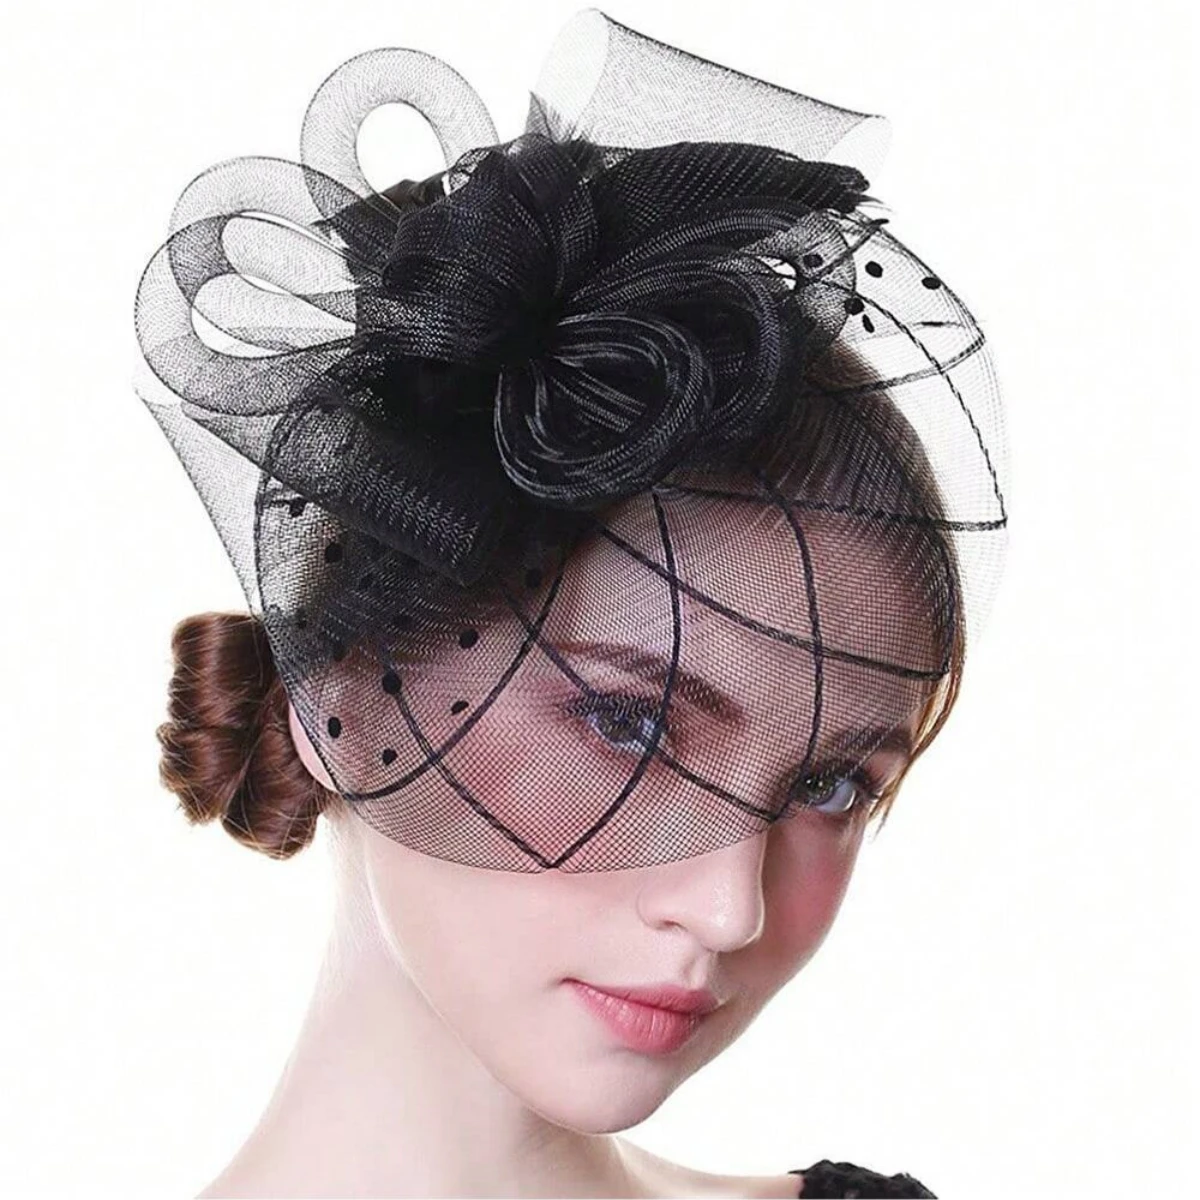 Women's Headwear Tea Party Church Wedding Mesh Cocktail Party Flower Feather Charming Clip Christmas Party Hair Accessories New christmas reindeer family 270x7x90 cm silver cold white mesh